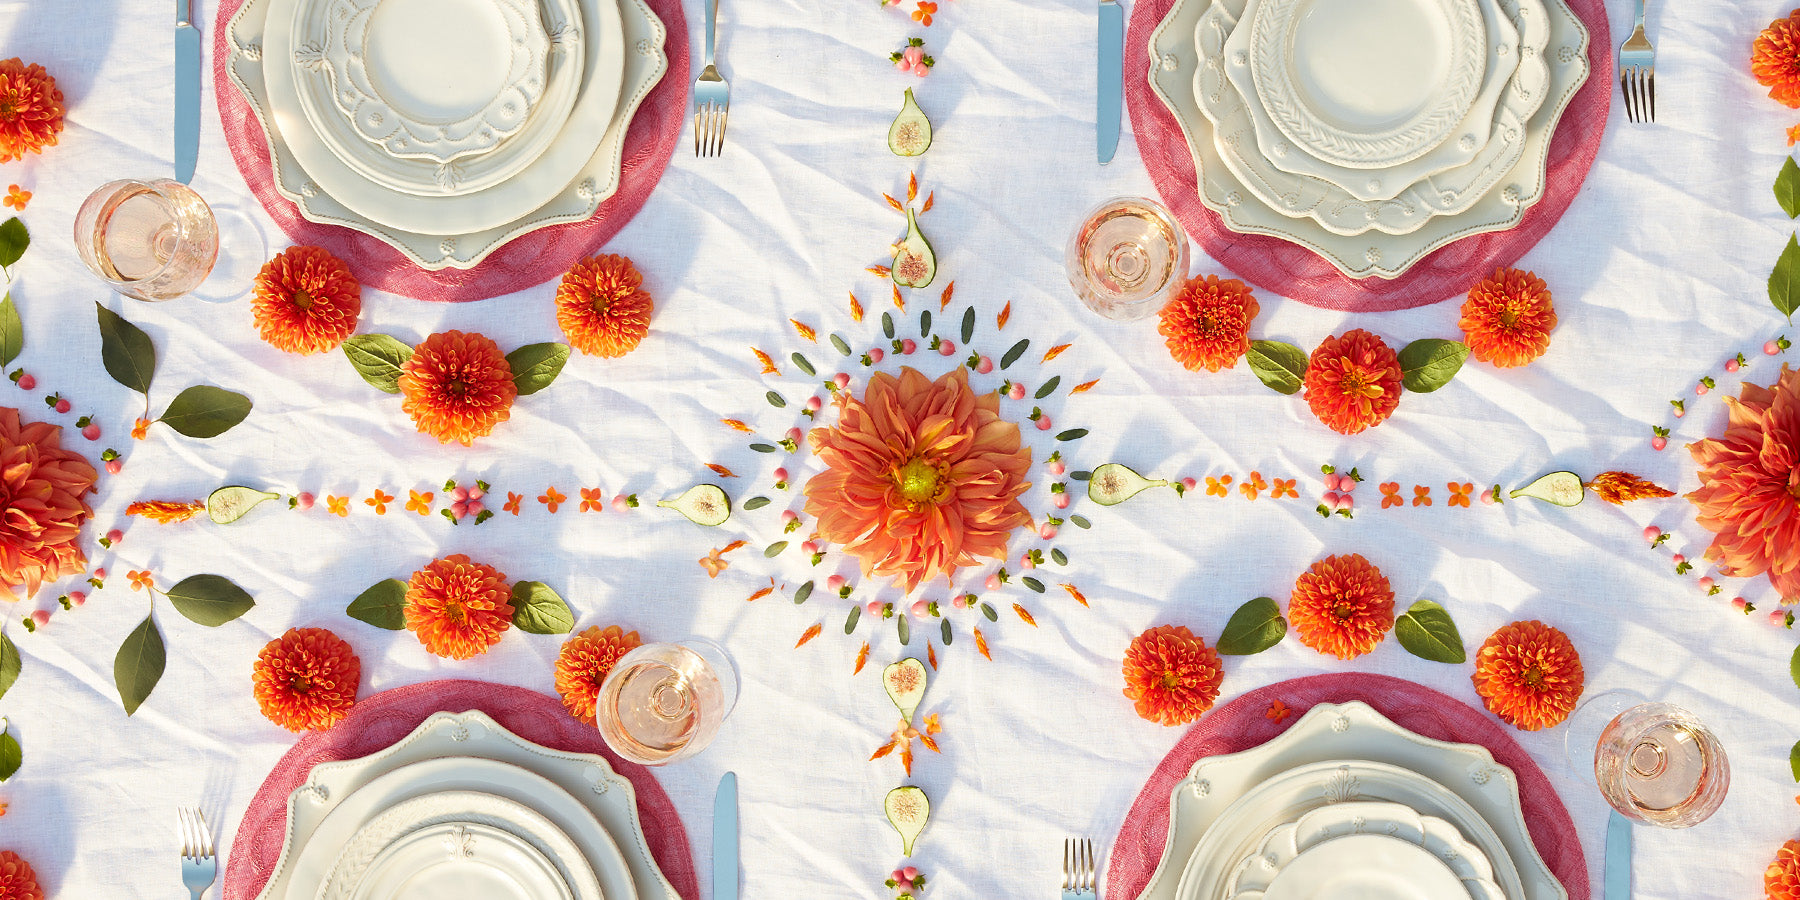 An overhead photo of white place settings on a white table cloth with orange and pink flowers.